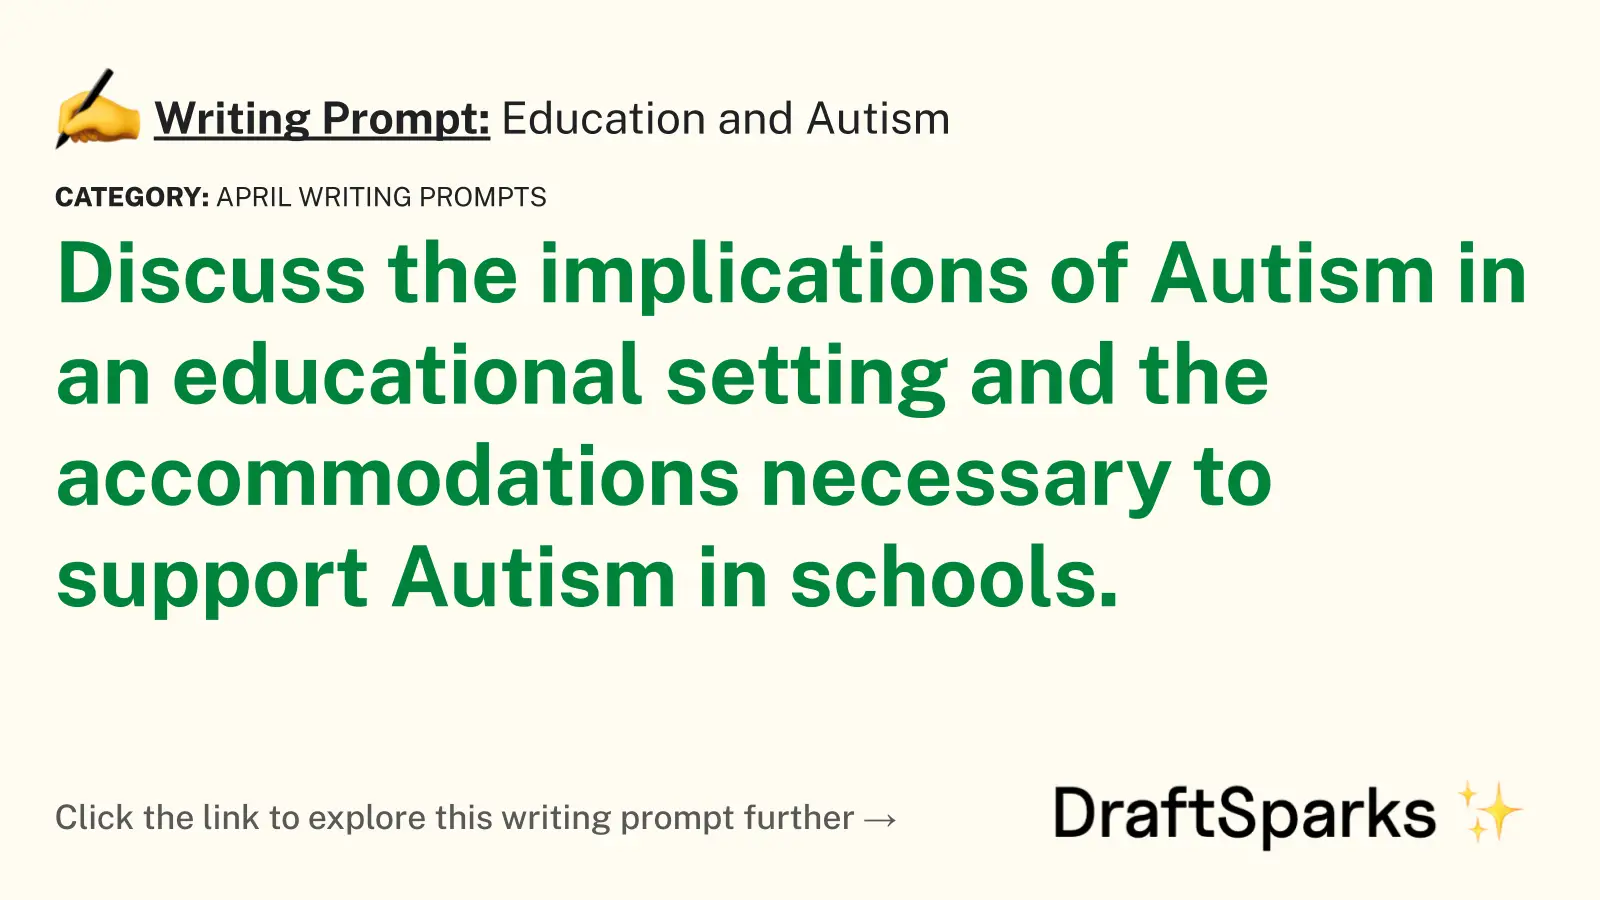 Education and Autism